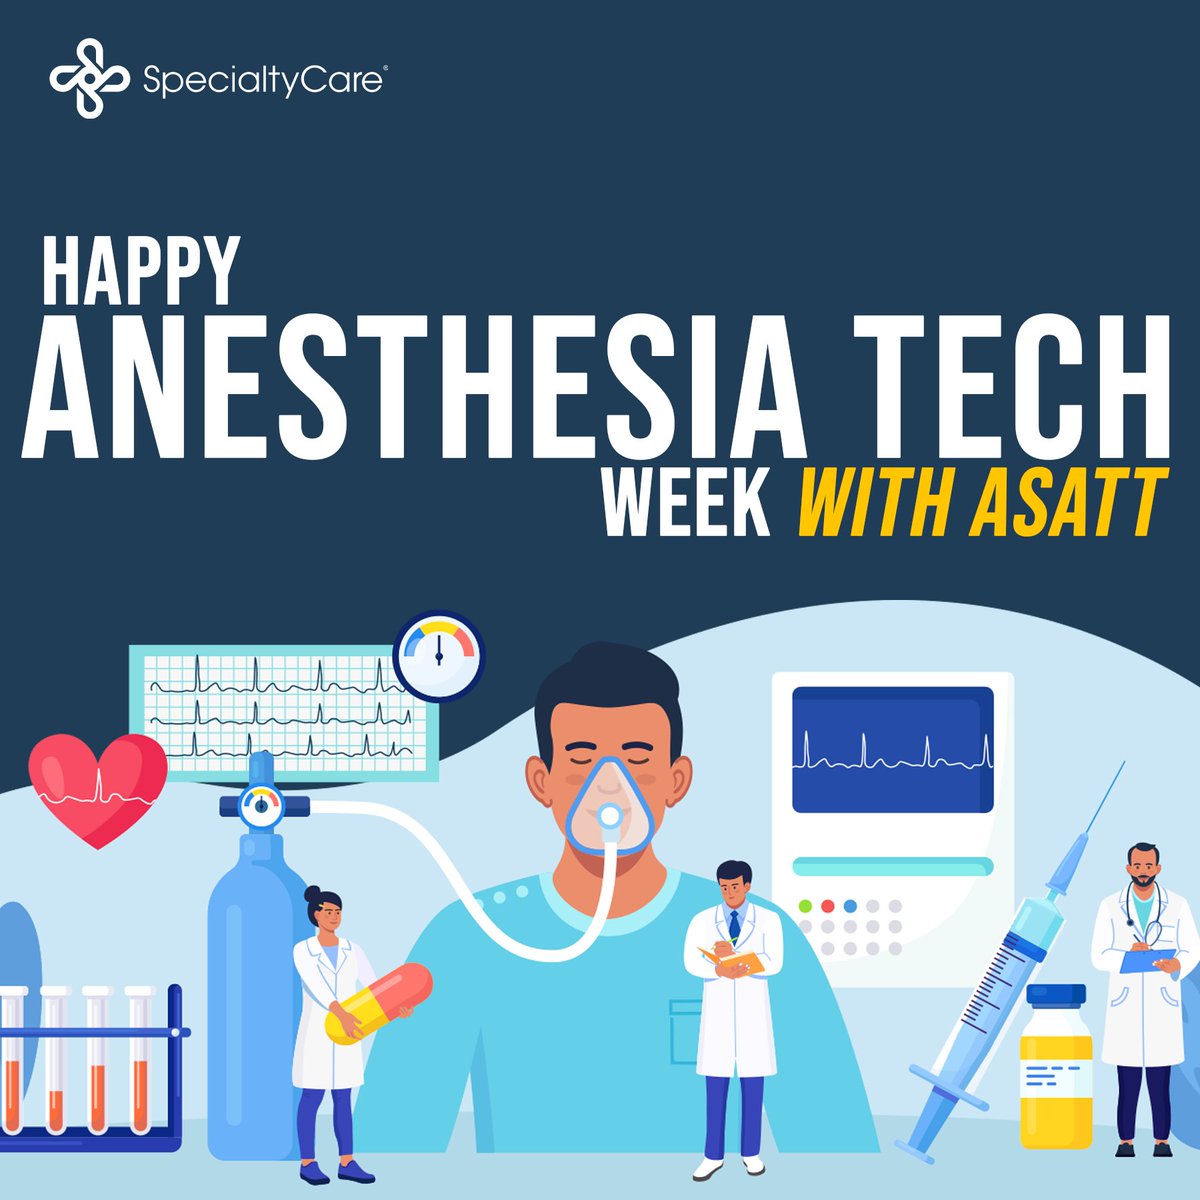 Let's take a moment to recognize and appreciate the incredible contributions of anesthesia technicians everywhere! Your dedication to ensuring patient comfort and safety is invaluable. Happy Anesthesia Tech Week to all!' 🙌💉 #AnesthesiaTechWeek #HealthcareHeroes #Gratitude